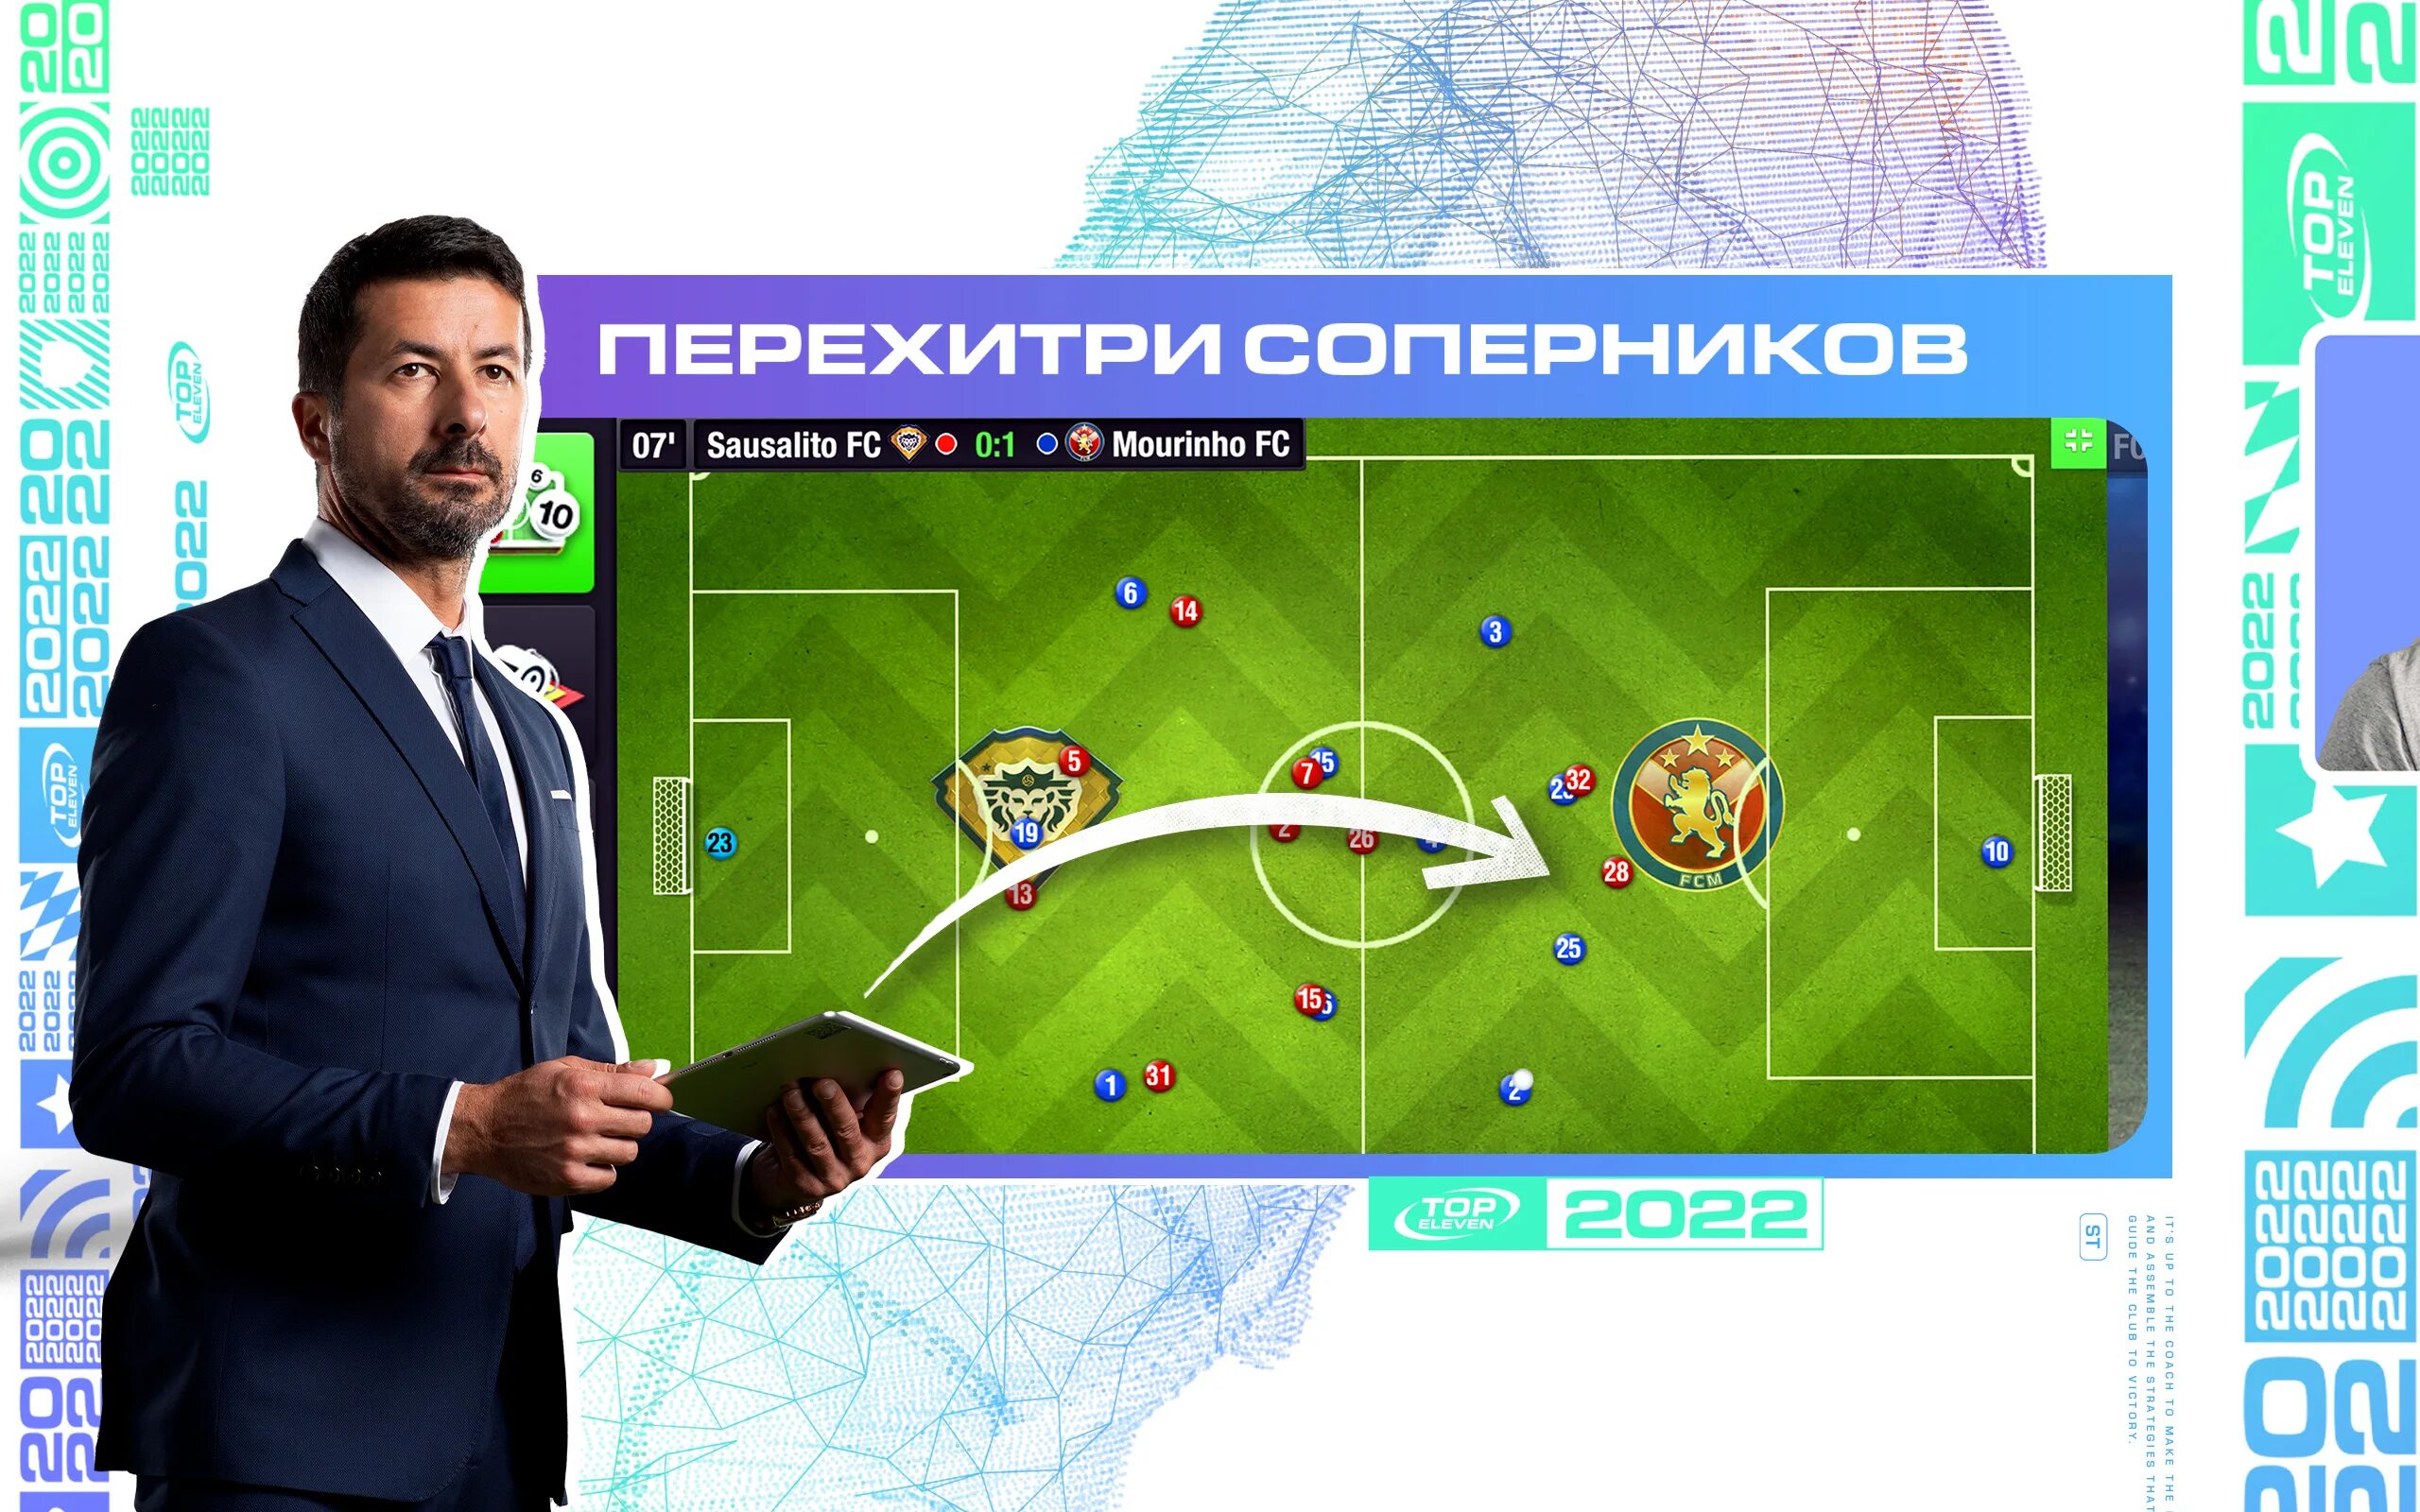 Top Eleven Football Manager. Top Eleven 2021. Top Eleven - be a Football Manager. Схема топ Элевен 2022.